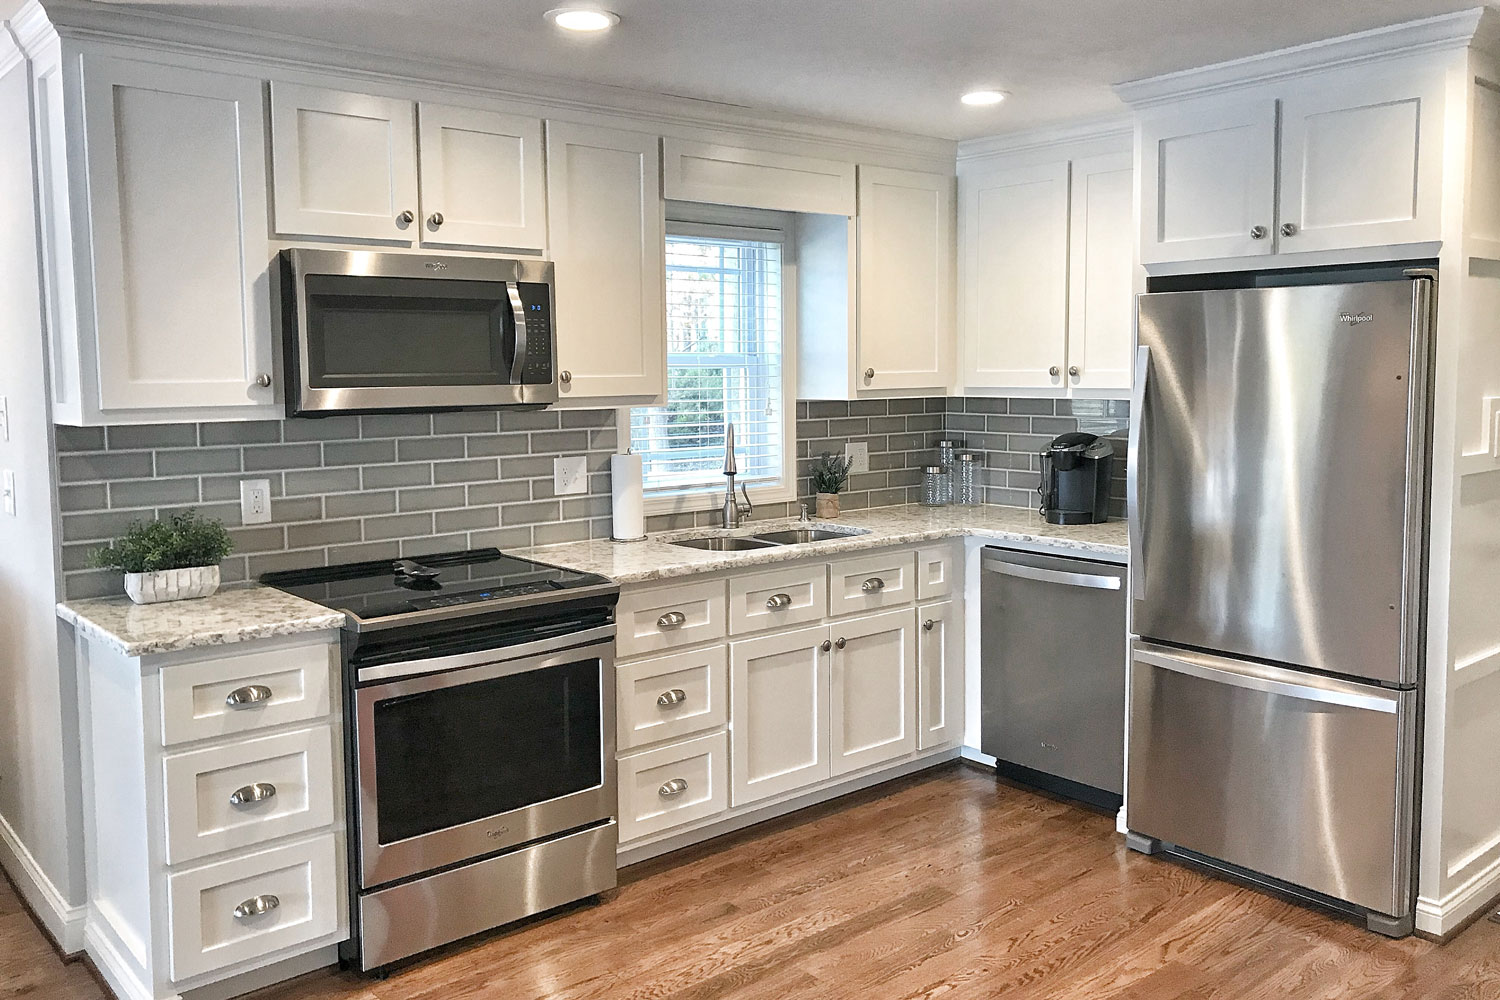 Classic and luxurious modern kitchen with white cabinets, silver cabinet handles and kitchen appliances